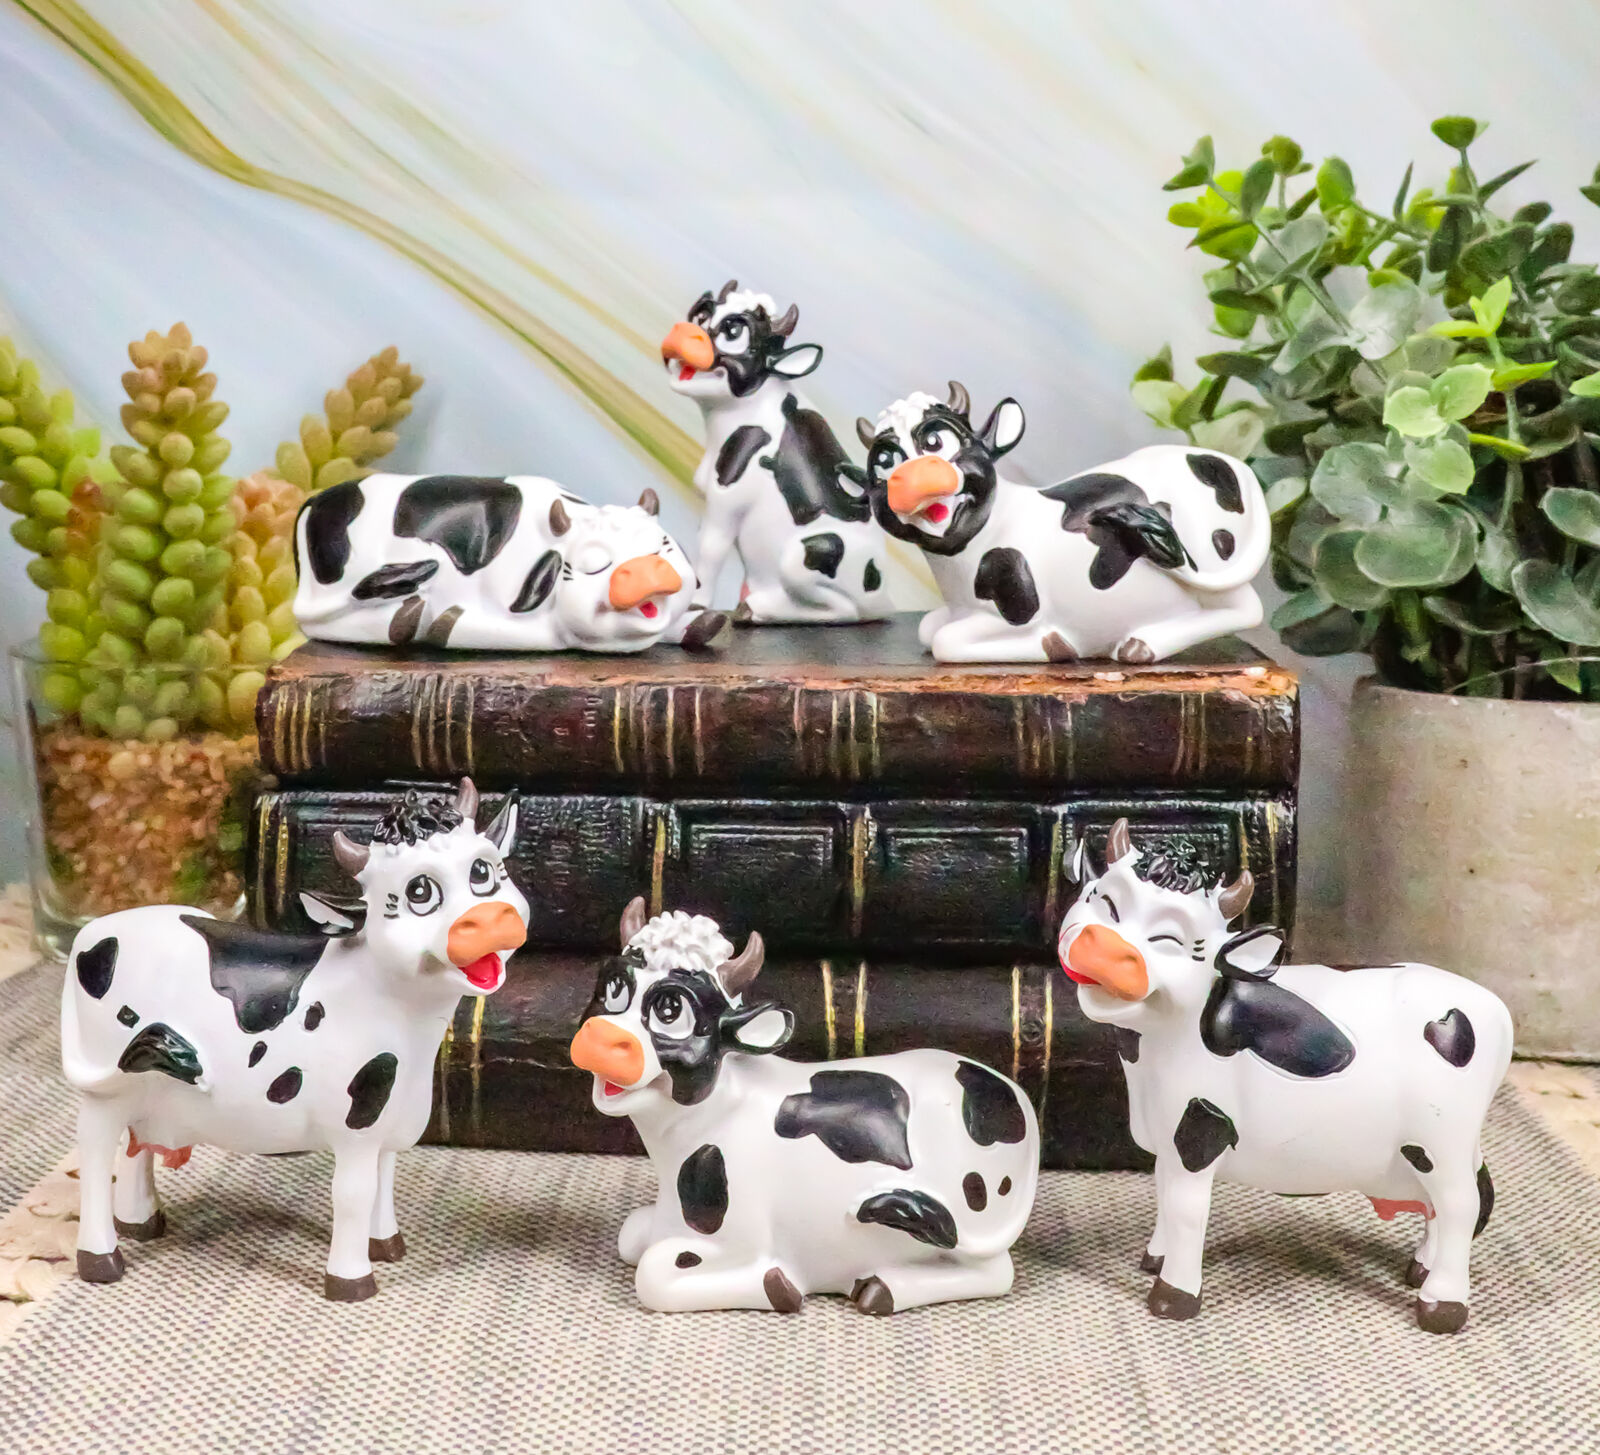 Ebros Set of 6 Whimsical Cute Bovine Cows Figurine Cattle Cow Animal Collectible